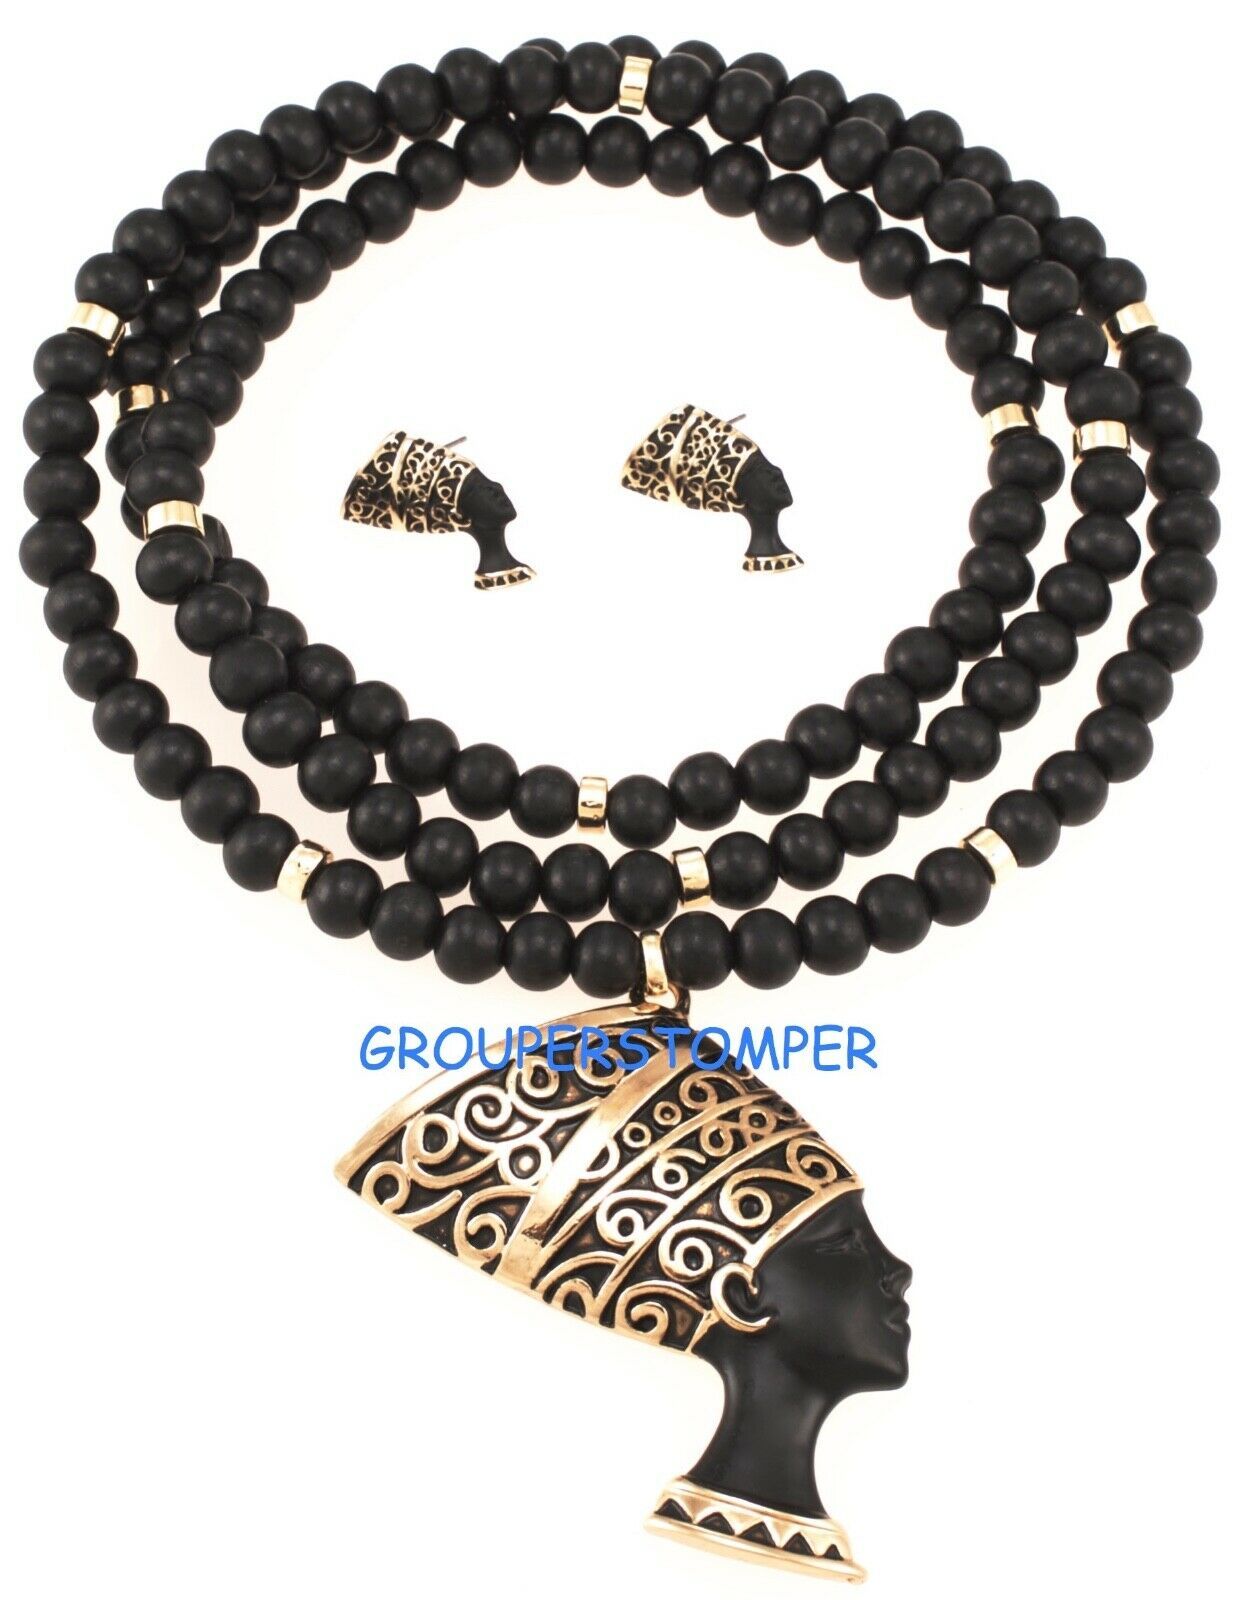 Nefertiti Egyptian Queen Pendant and Earrings Necklace Set - $24.70 - $37.60